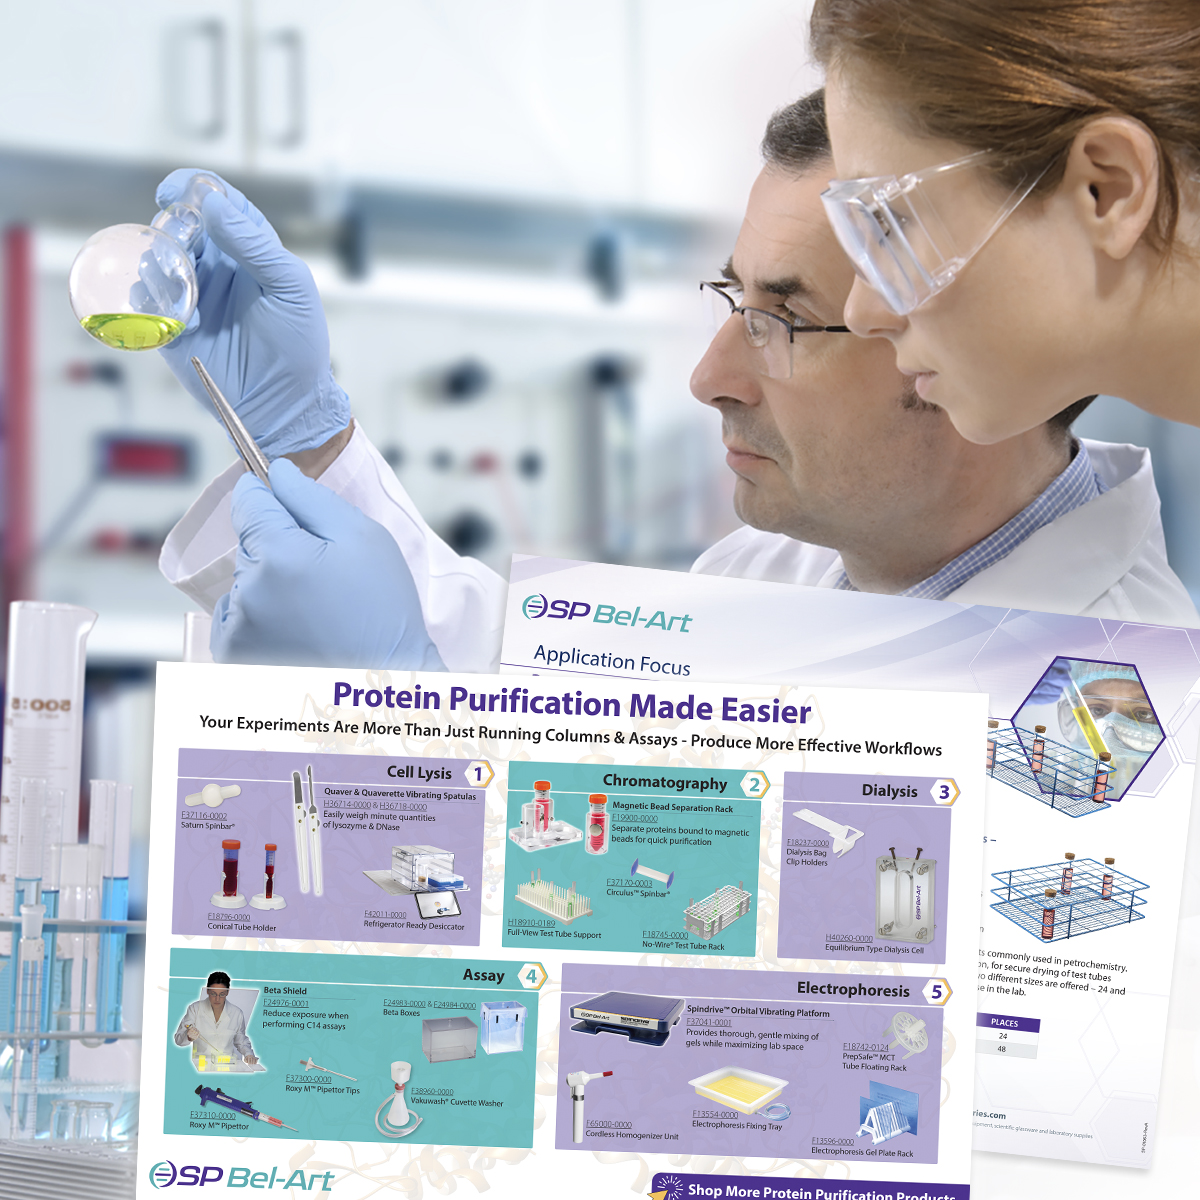 Image:  SP Scienceware Product Applications Focus & Workflow